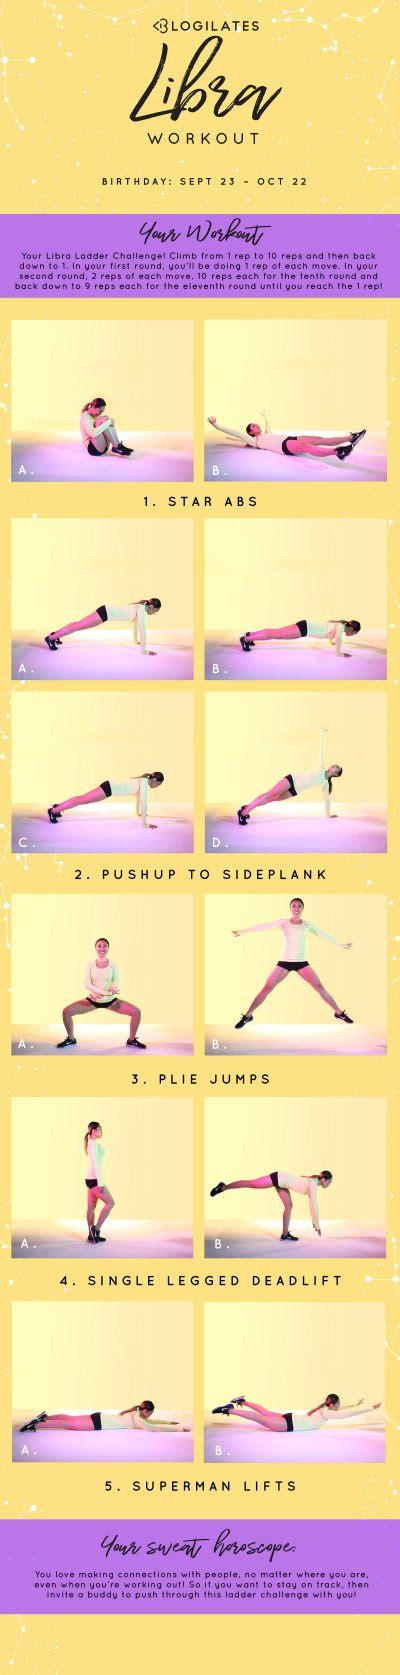 15 Blogilates Arm Workout Images Arm Workouts Easy